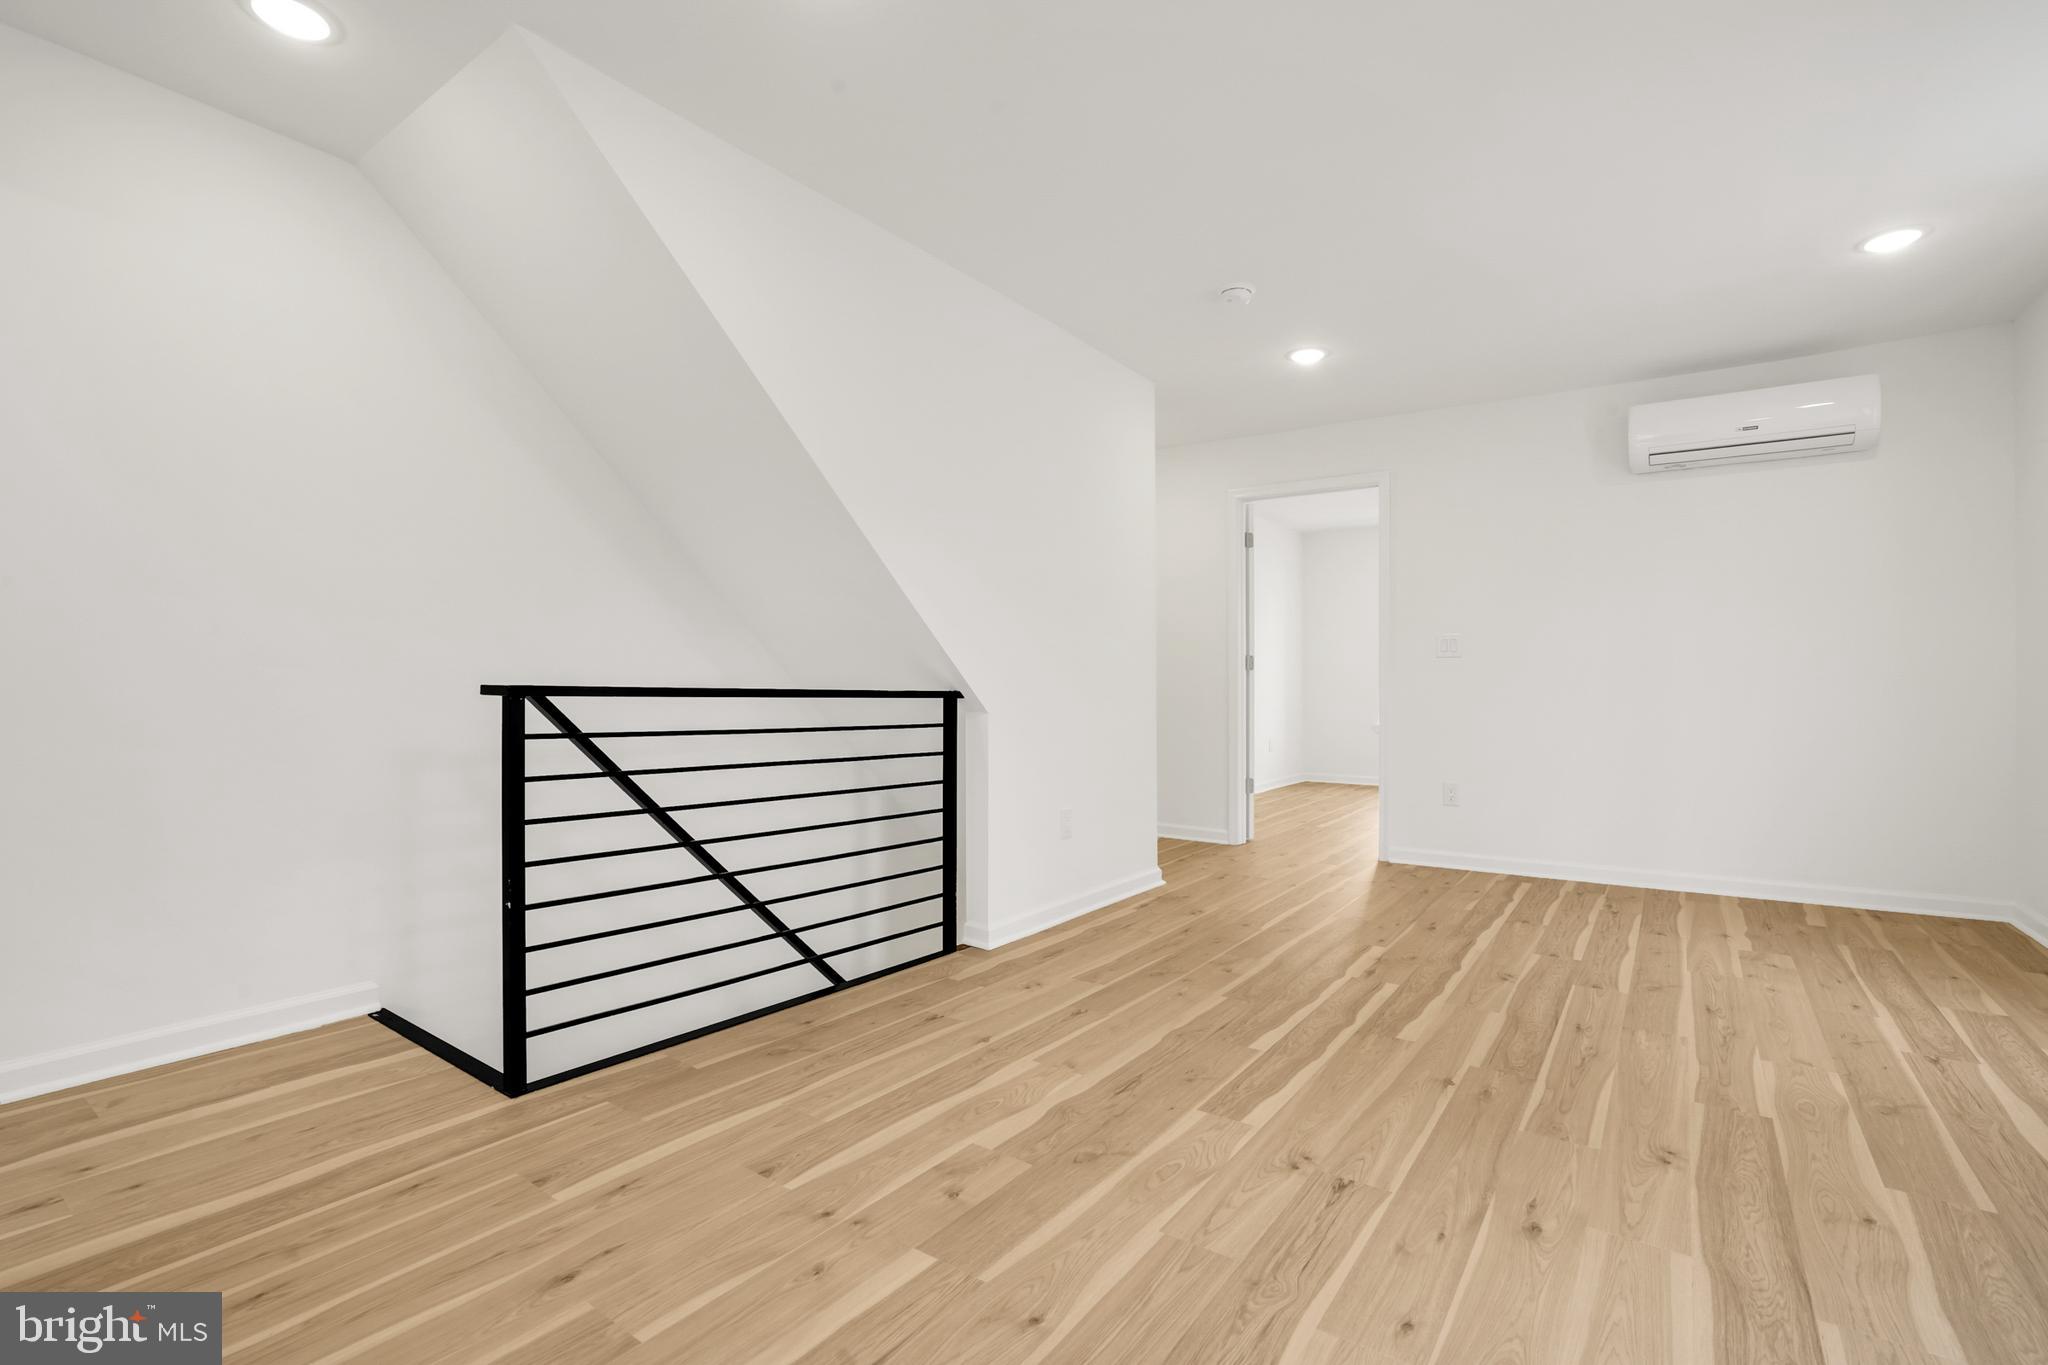 a view of a room with wooden floor and white walls